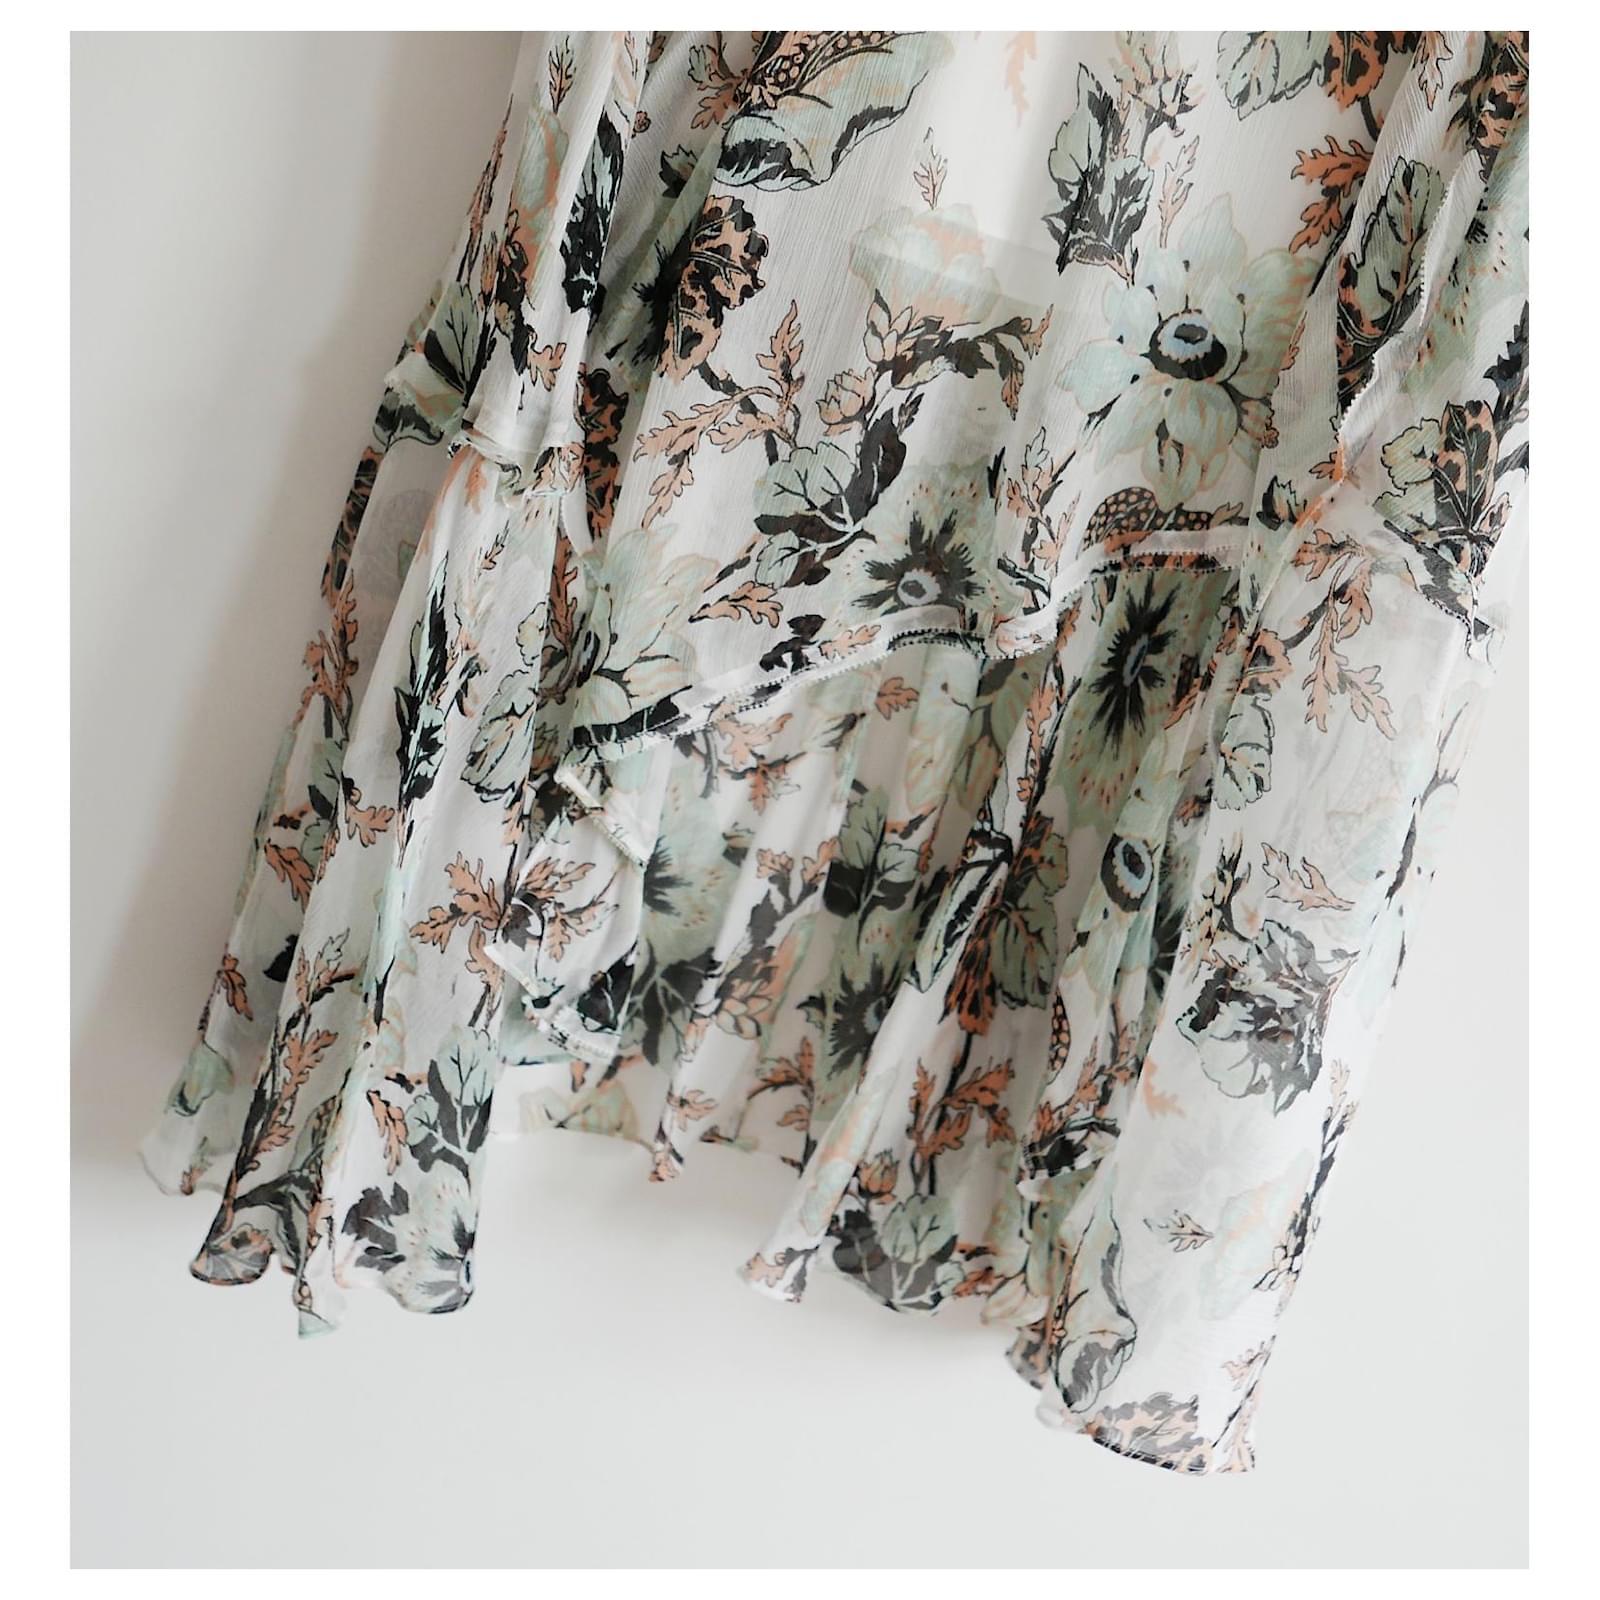 Super pretty Diane Von Furstenberg Carol dress - bought for £675 and new with tags. Made from soft silk georgette with a delicately muted floral print, it has ruffle trims, flutter sleeves and asymmetric, cu away hem. Has back zip. Size US4/UK8.